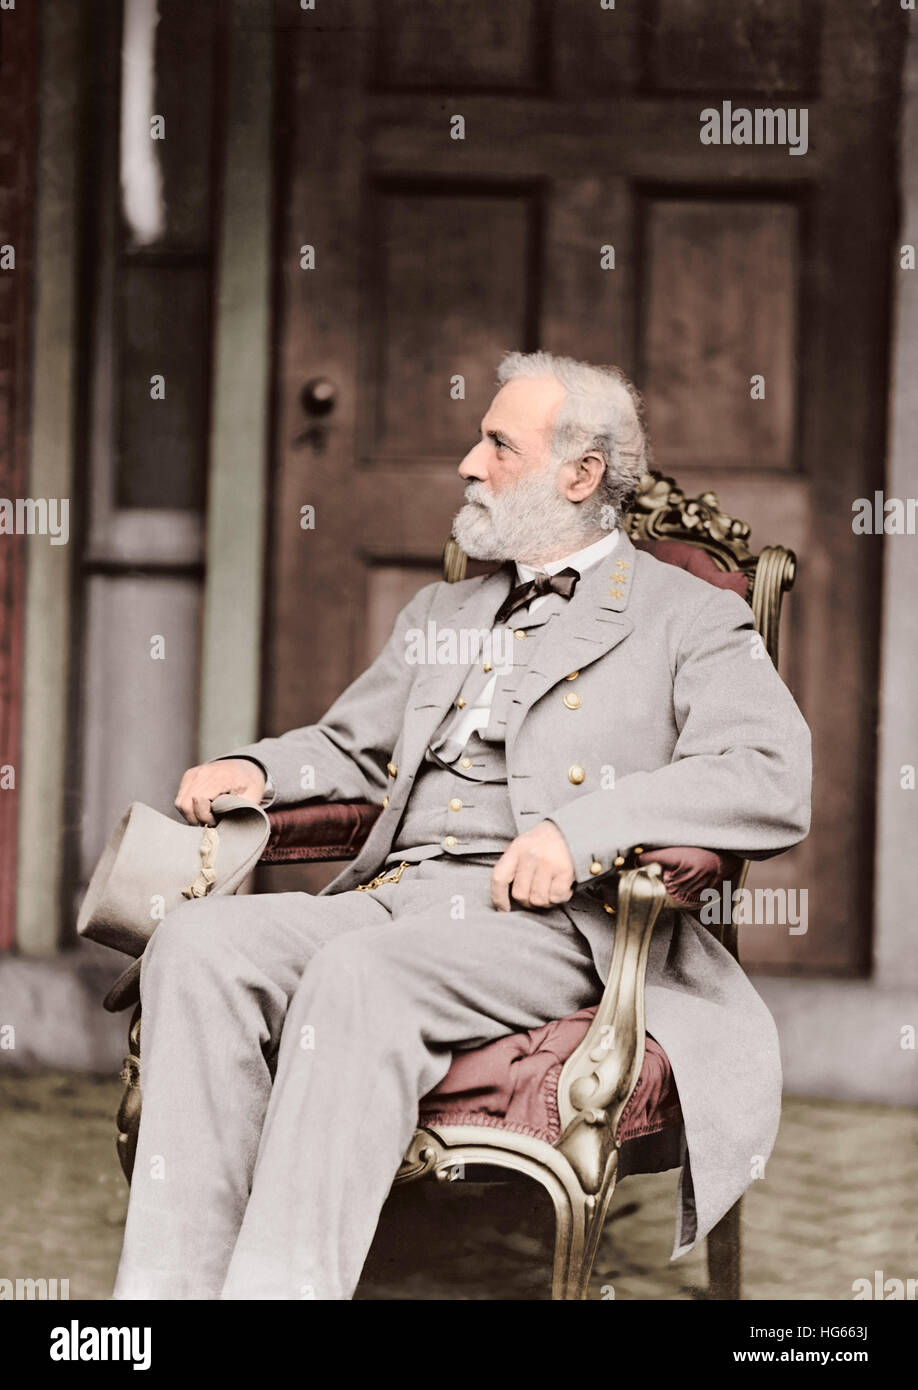 Confederate Army General Robert E. Lee sitting in chair. Stock Photo